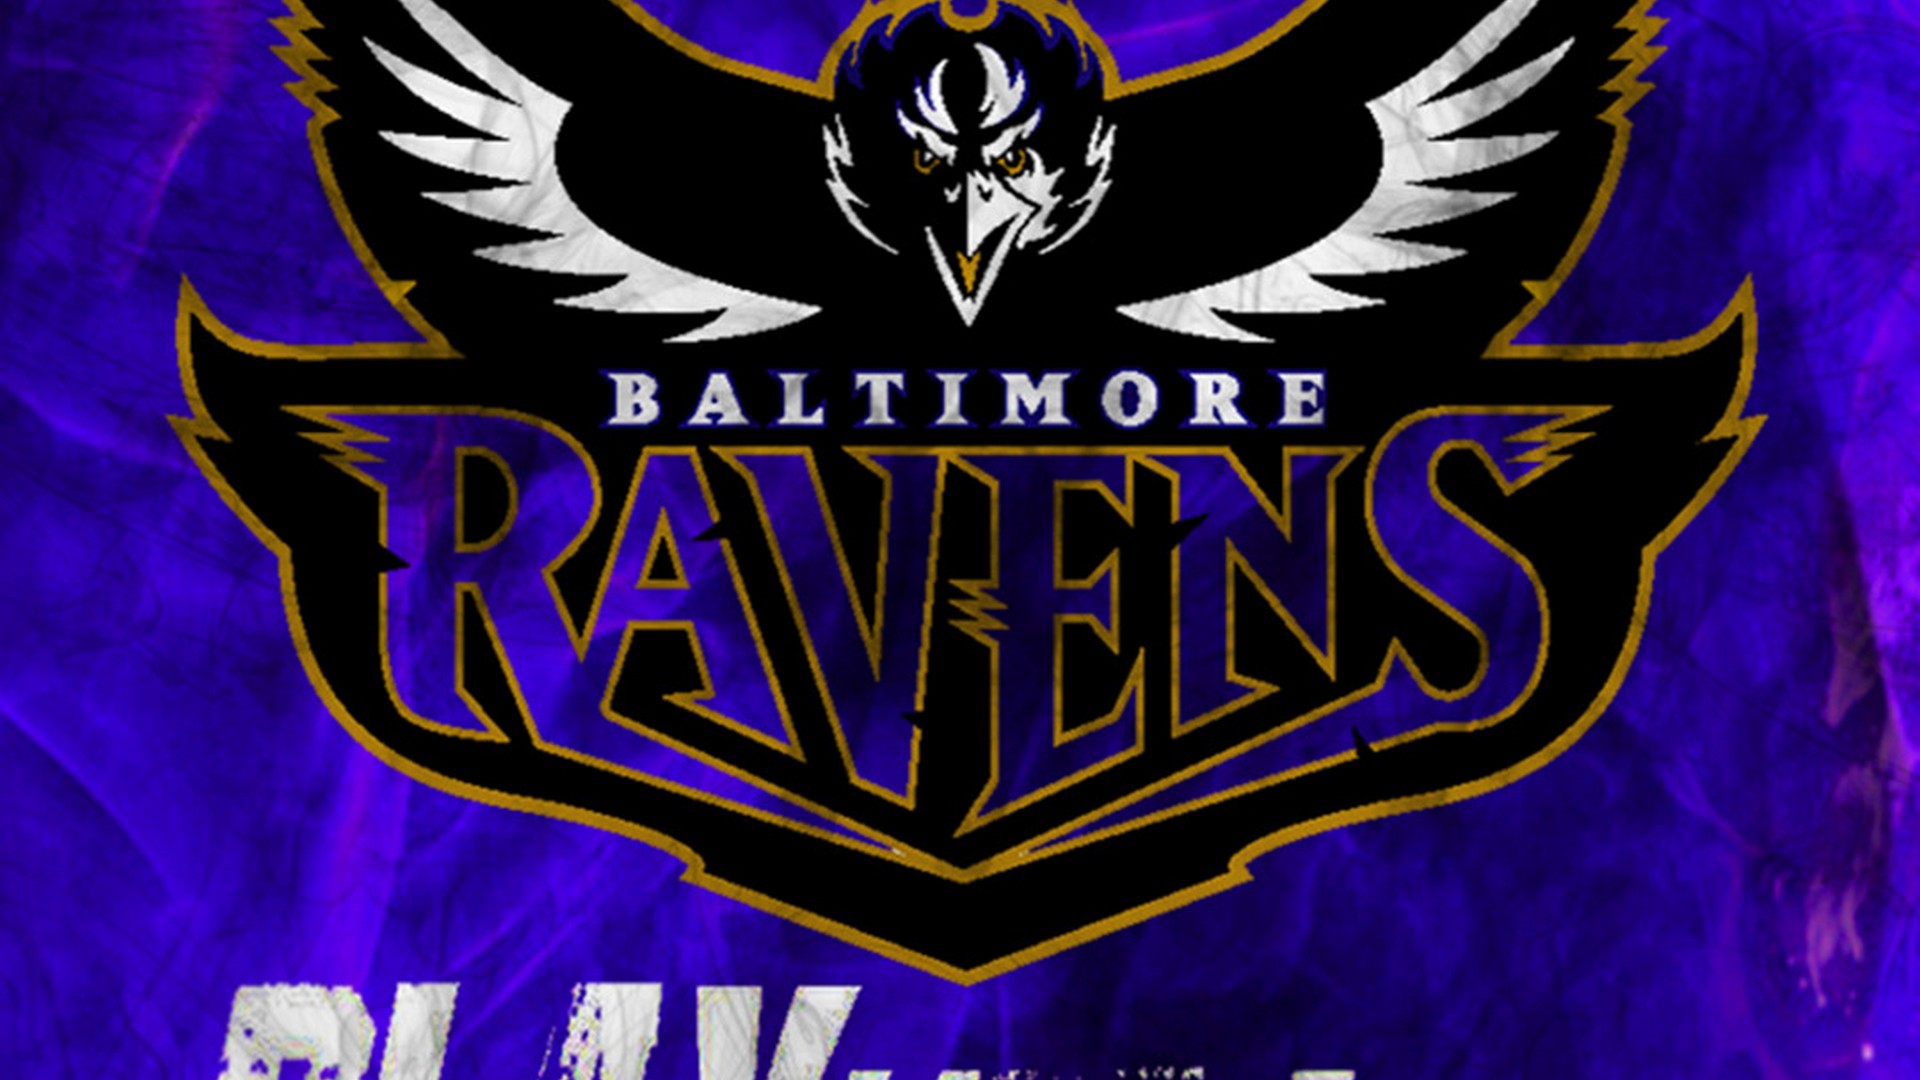 HD Baltimore Ravens Backgrounds With Resolution 1920X1080